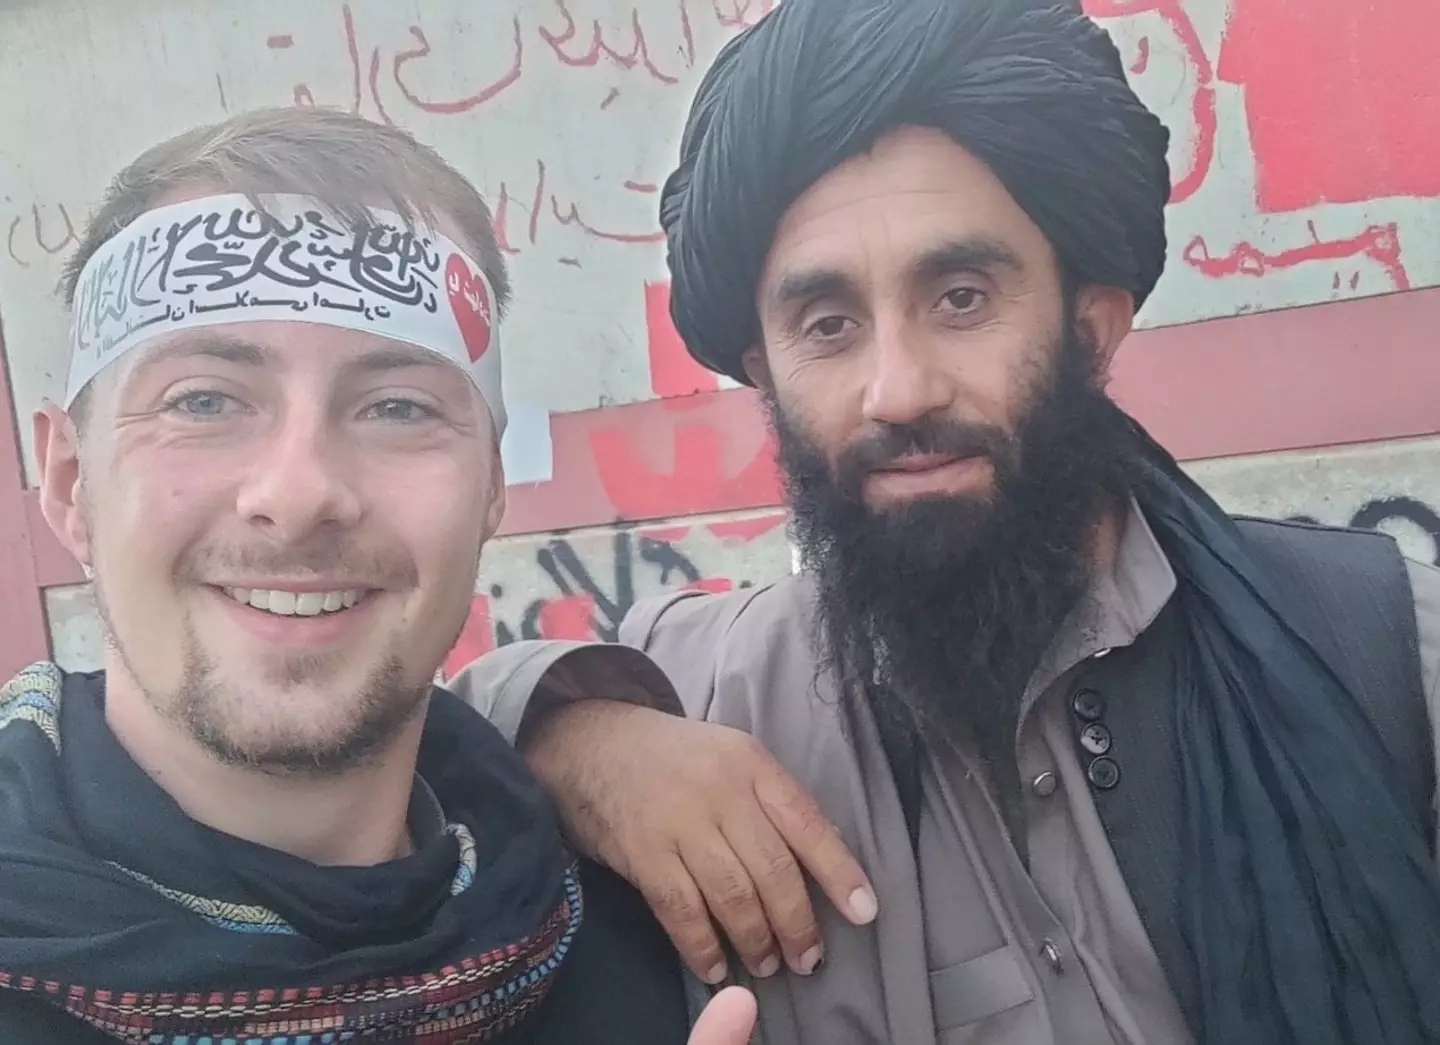 The tourist met the Taliban on one of his previous journeys.